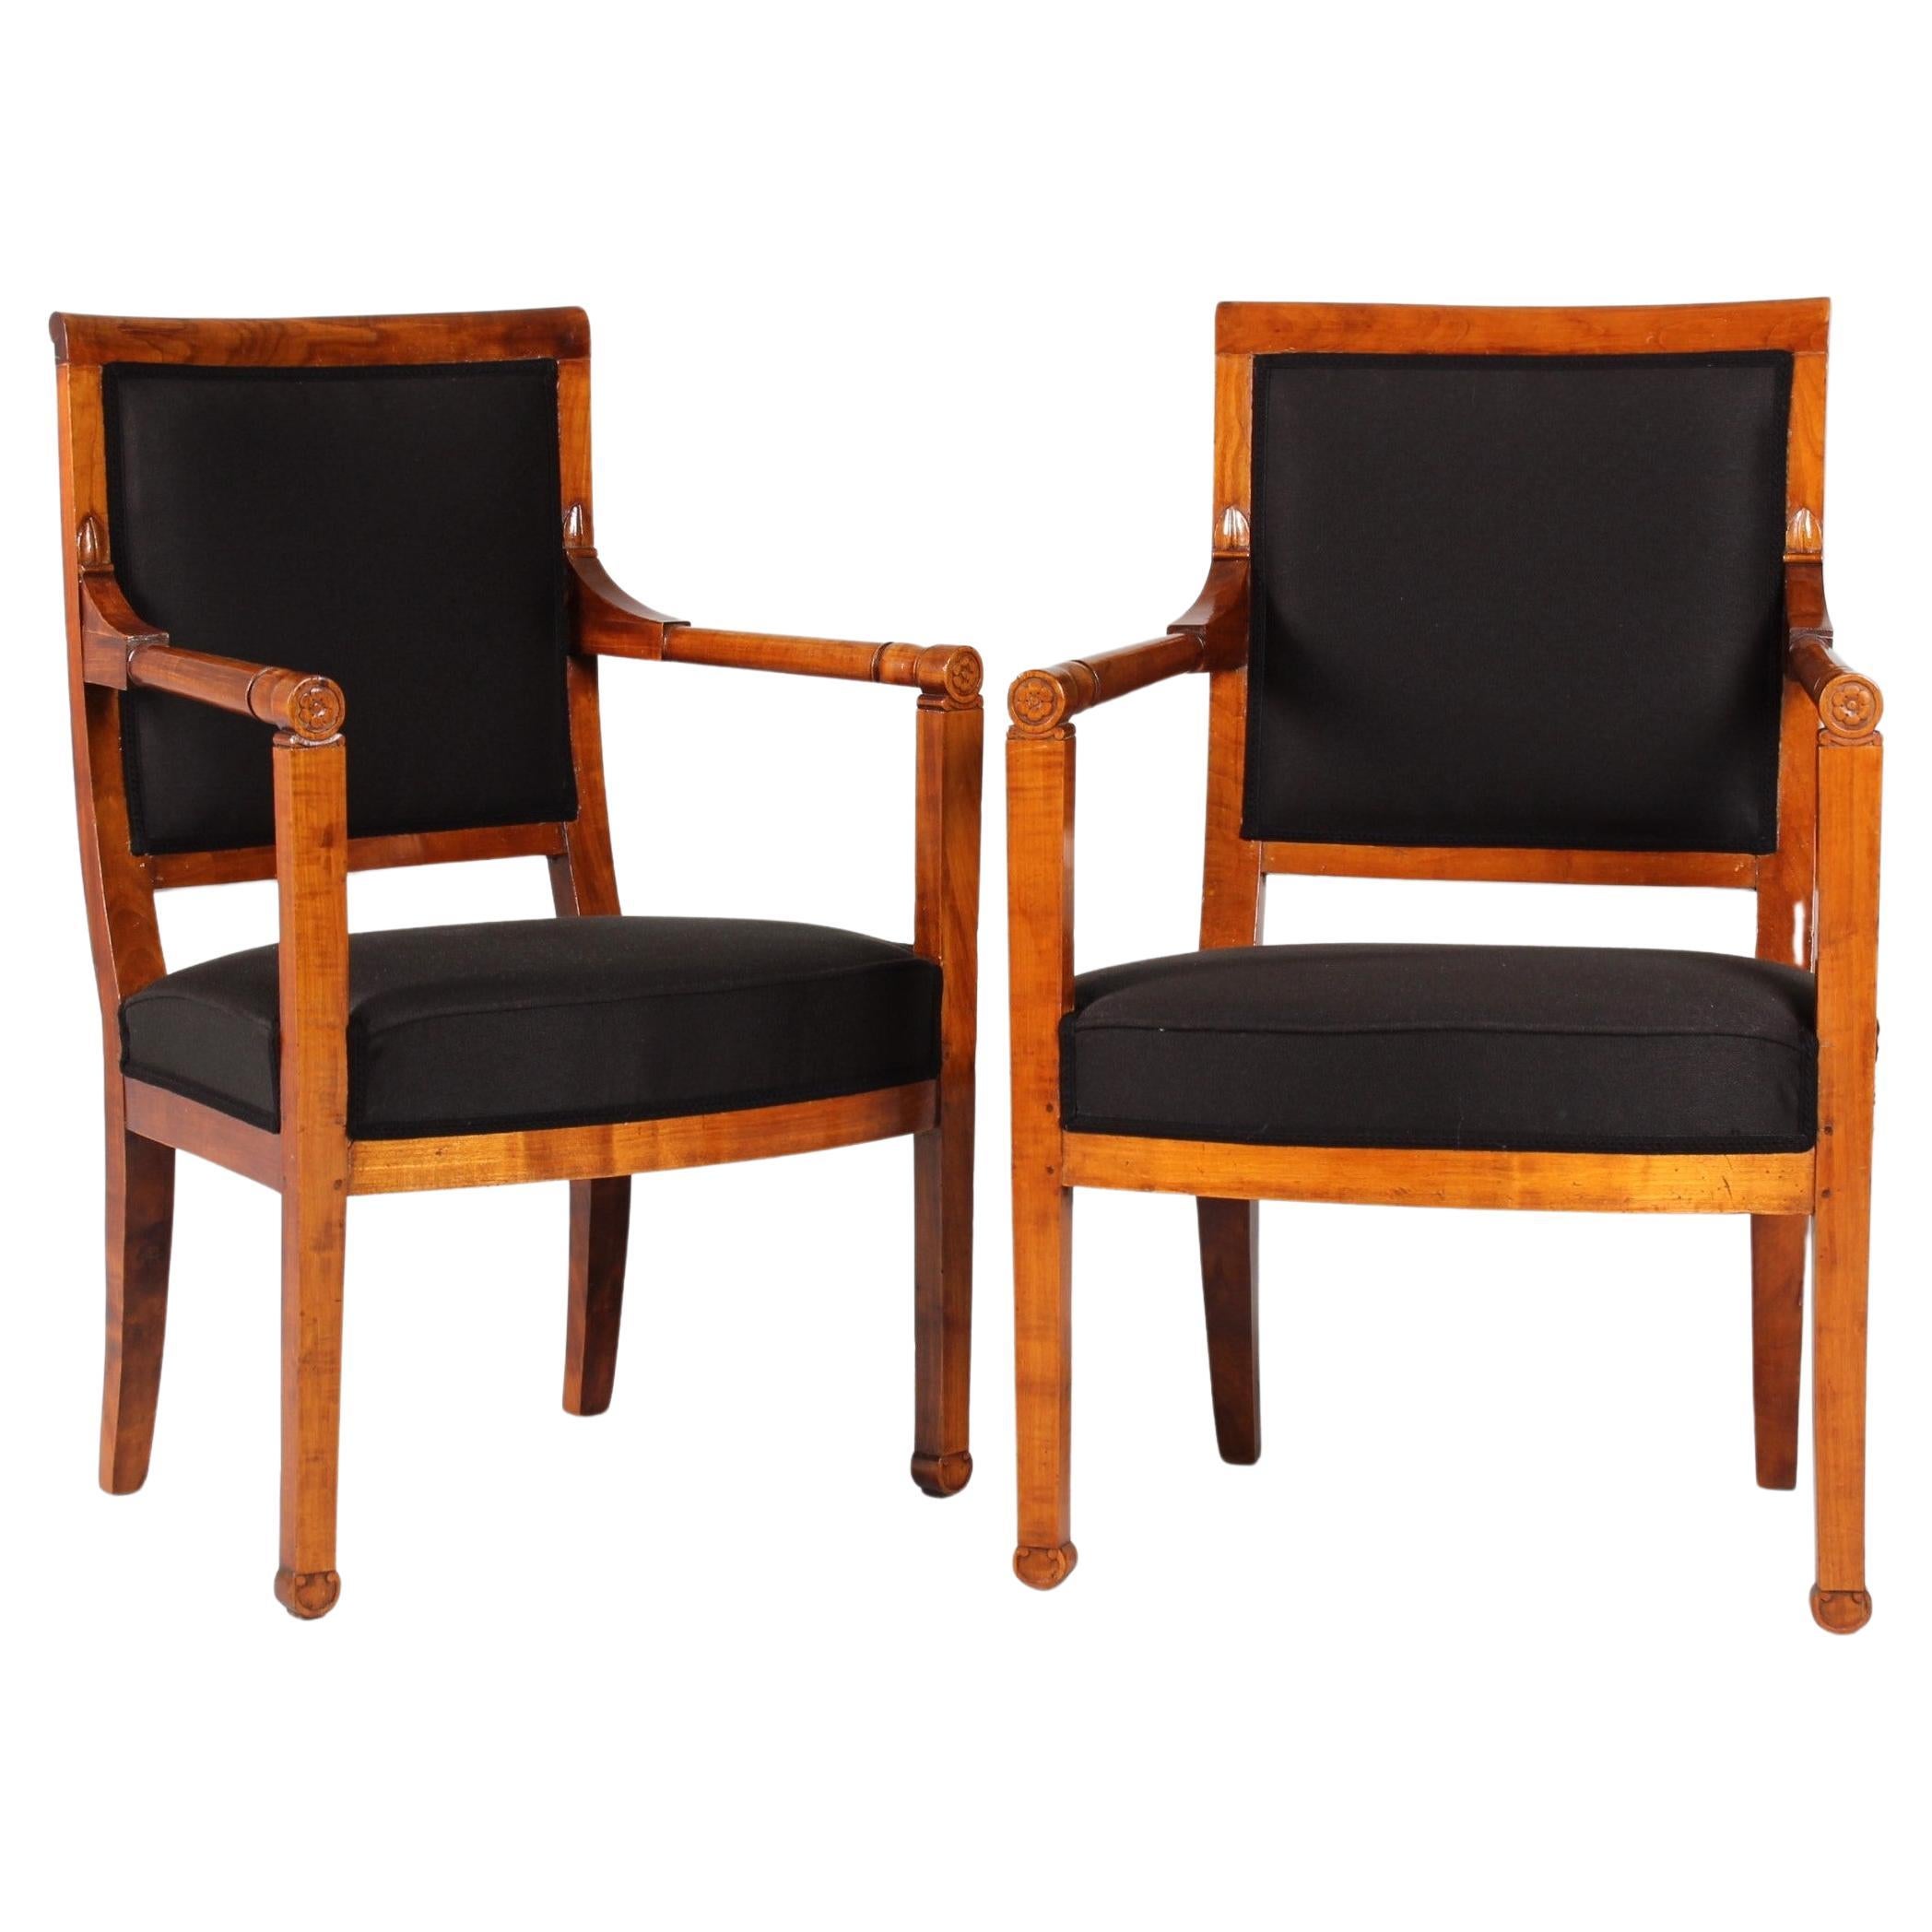 Pair of Directoire Armchairs, Cherry, France circa 1800